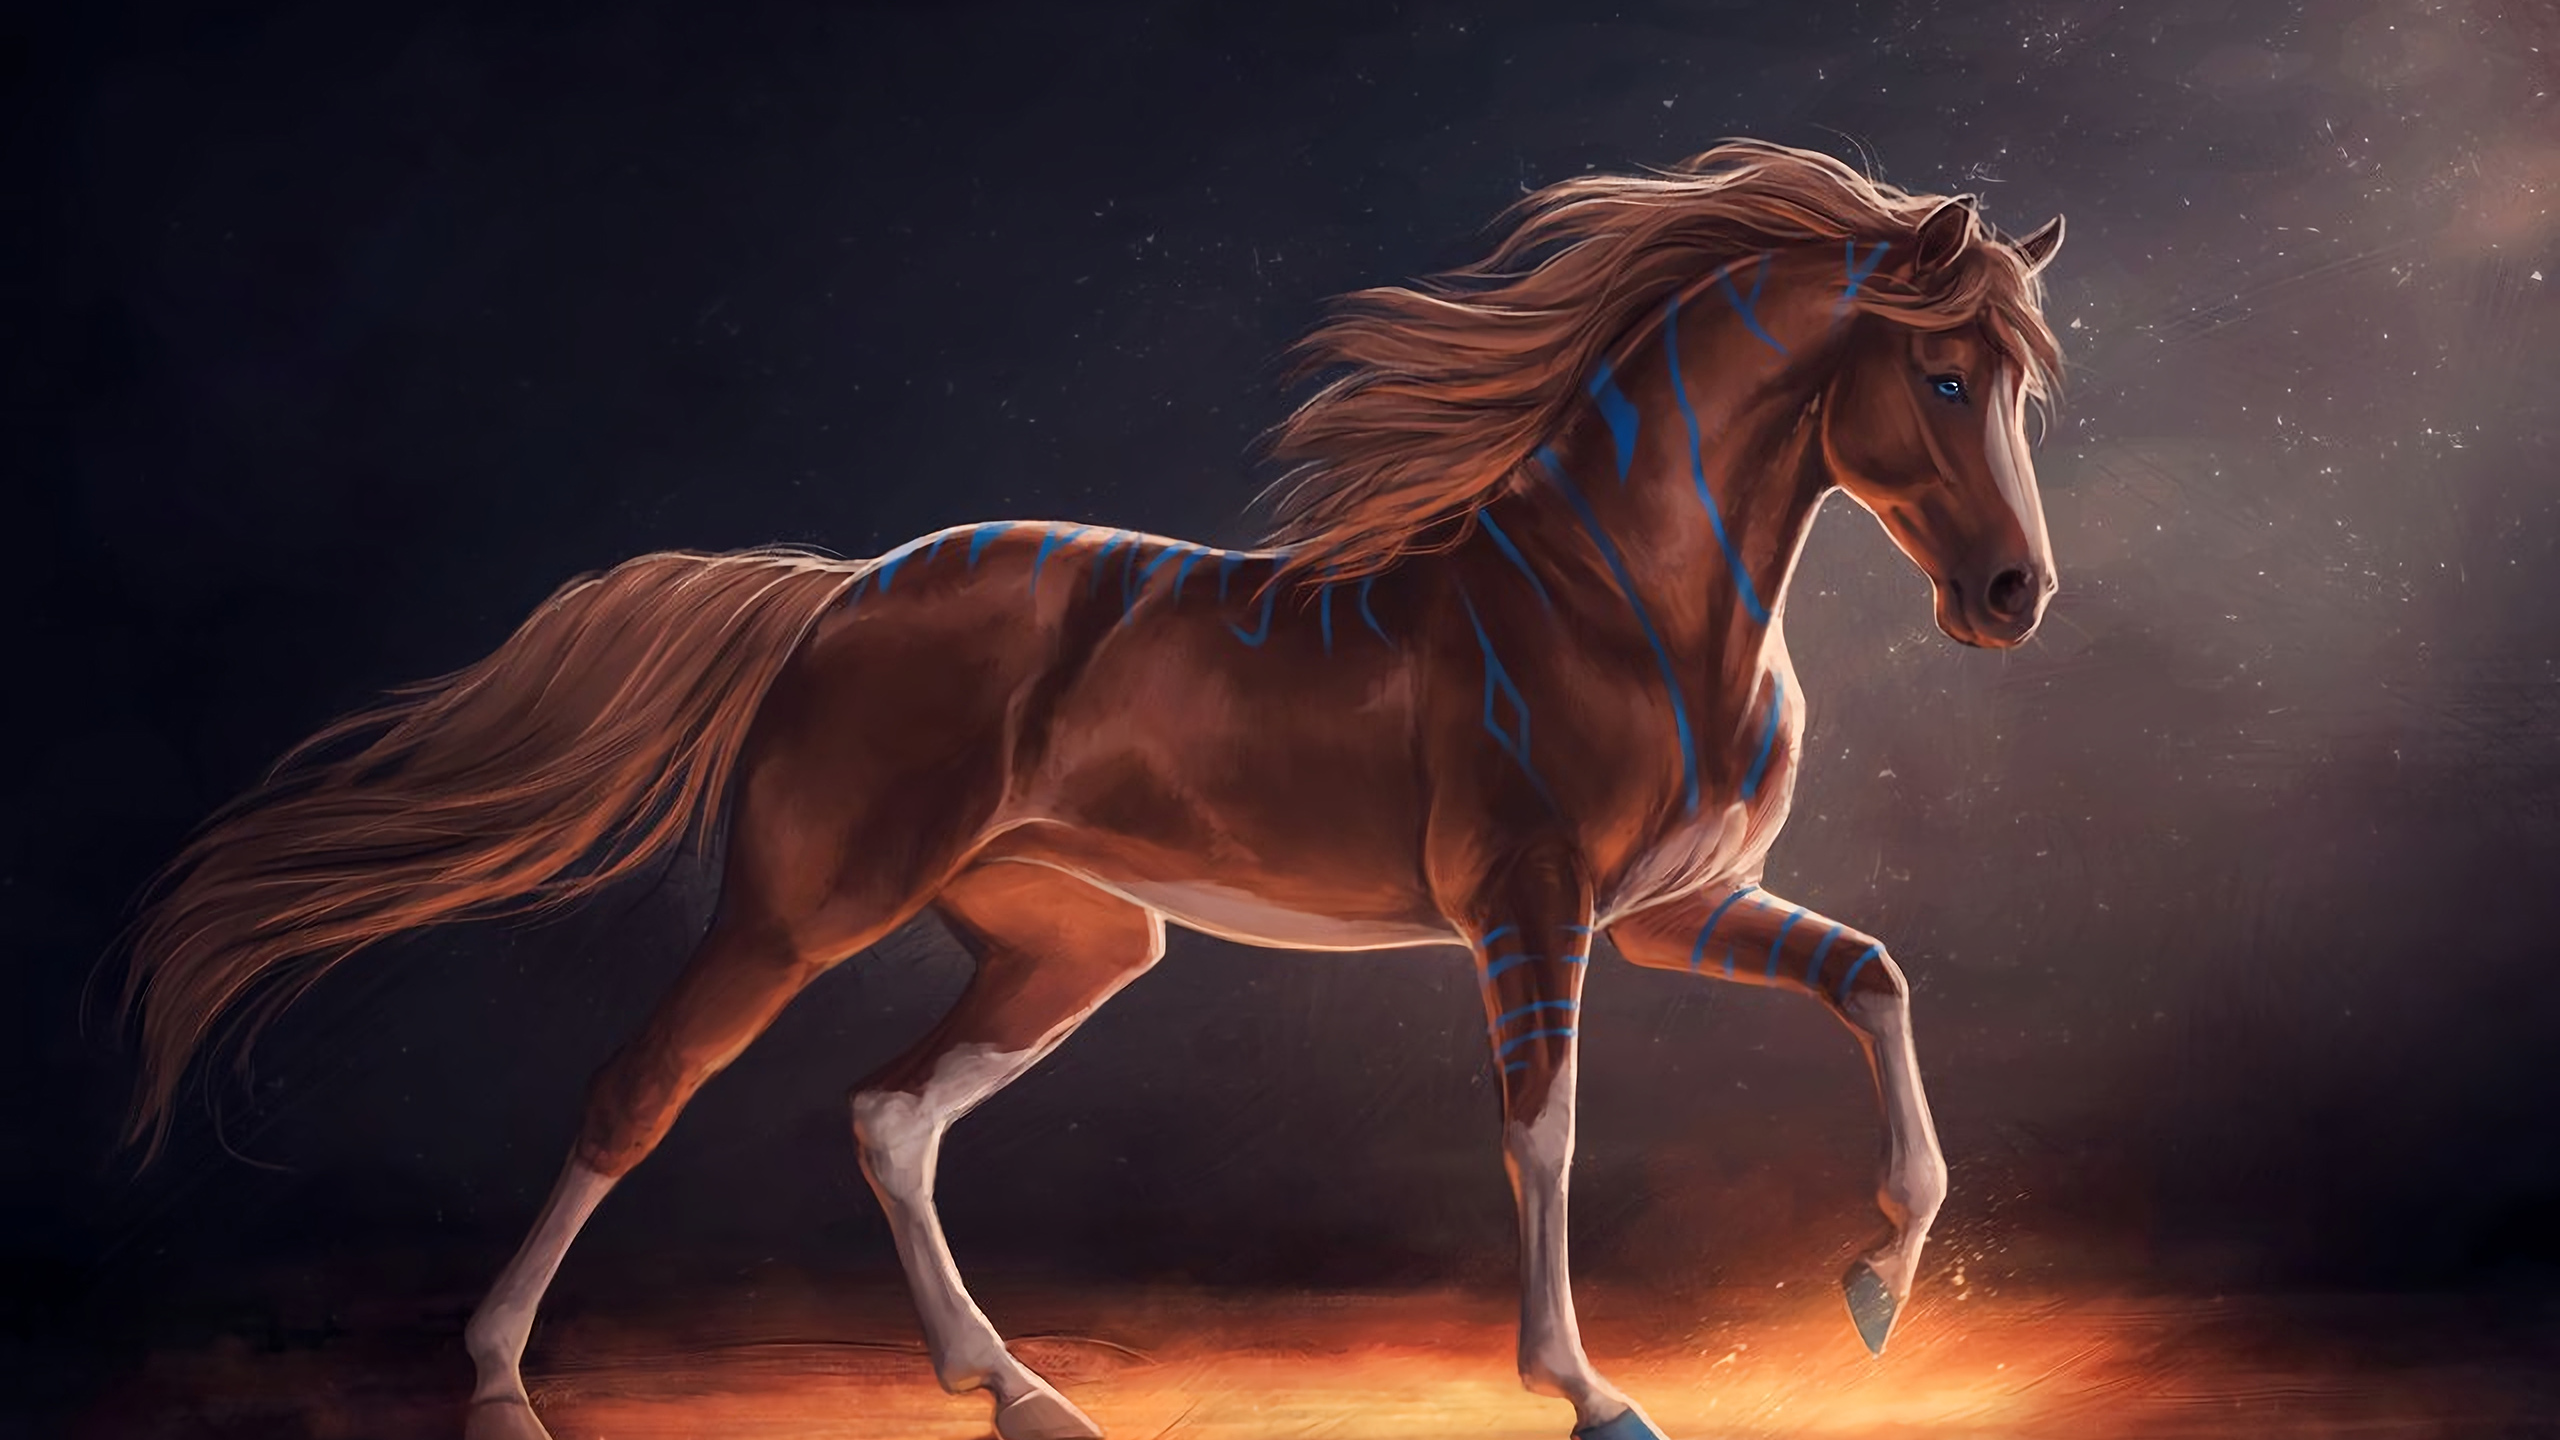 2560x1440 Horse Digital Art 1440p Resolution Hd 4k Wallpapers Images Backgrounds Photos And Pictures